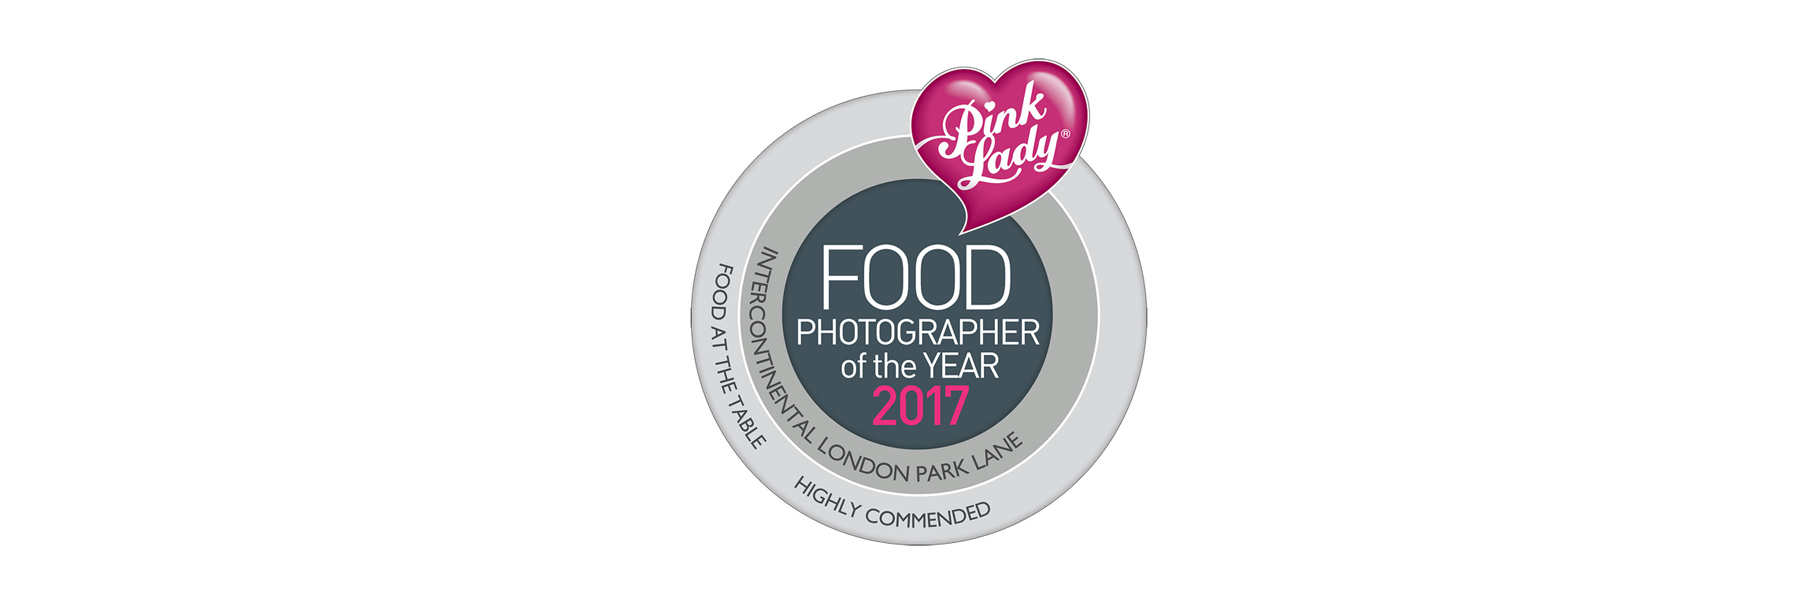 Pink Lady Food Photographer of the Year 2017・Highly Commended・Manja Wachsmuth